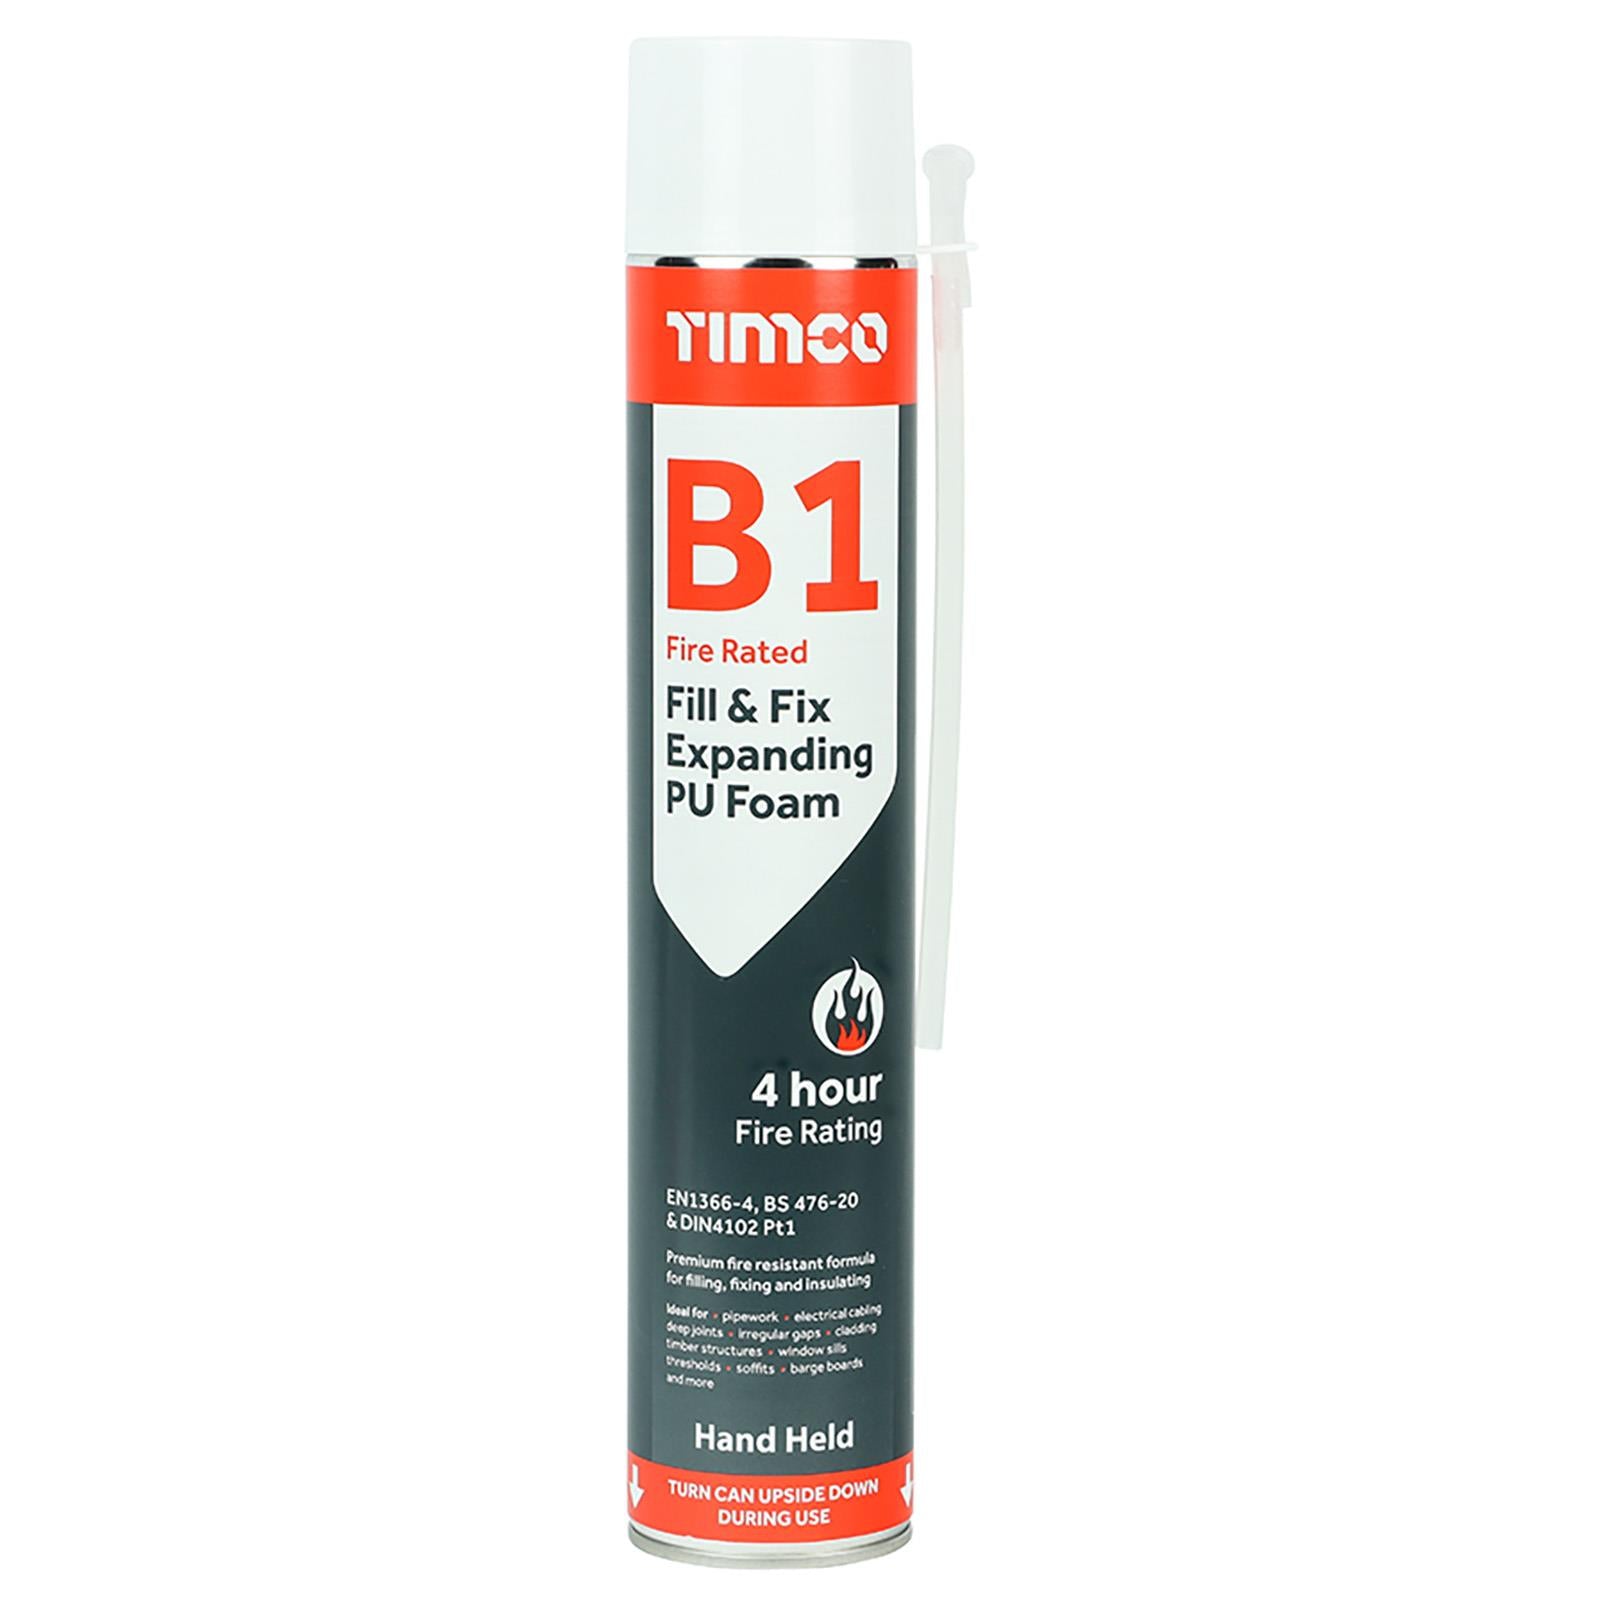 TIMCO B1 Fill and Fix Expanding PU Foam Fire Rated 750ml Can Hand Held